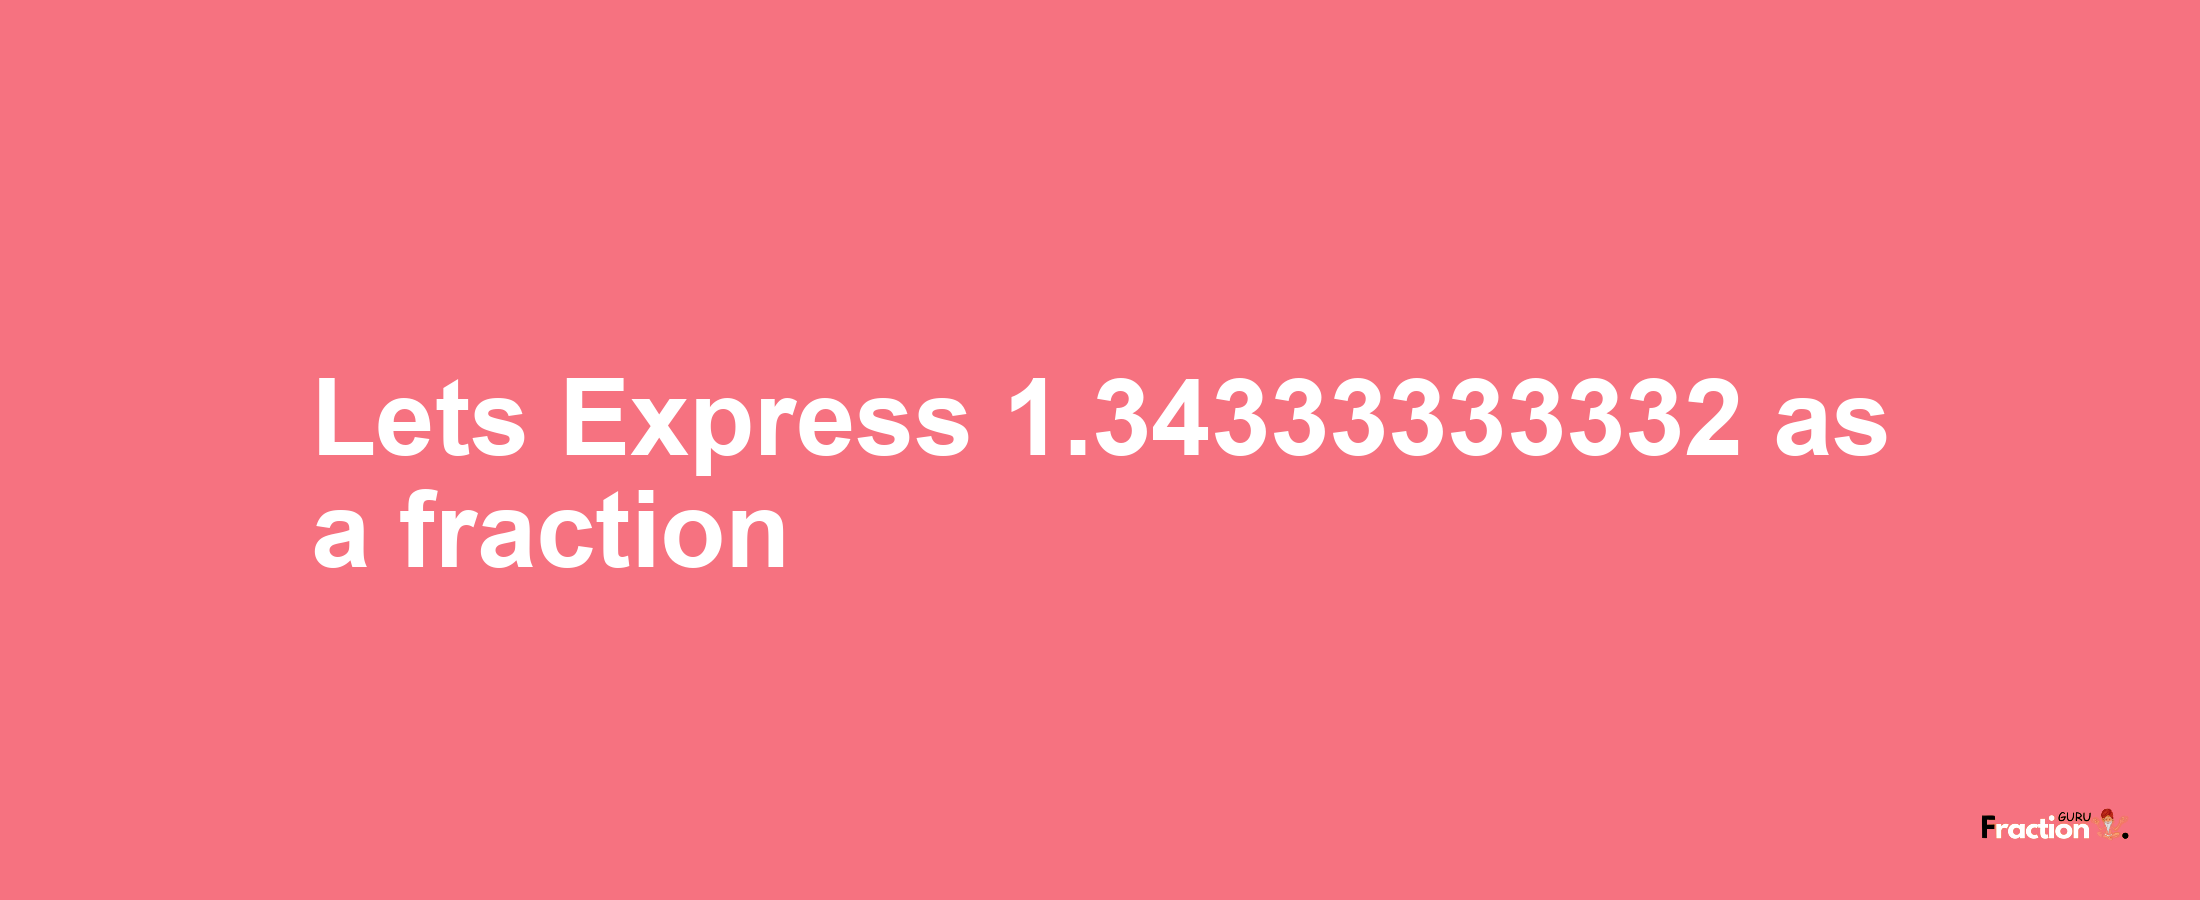 Lets Express 1.34333333332 as afraction